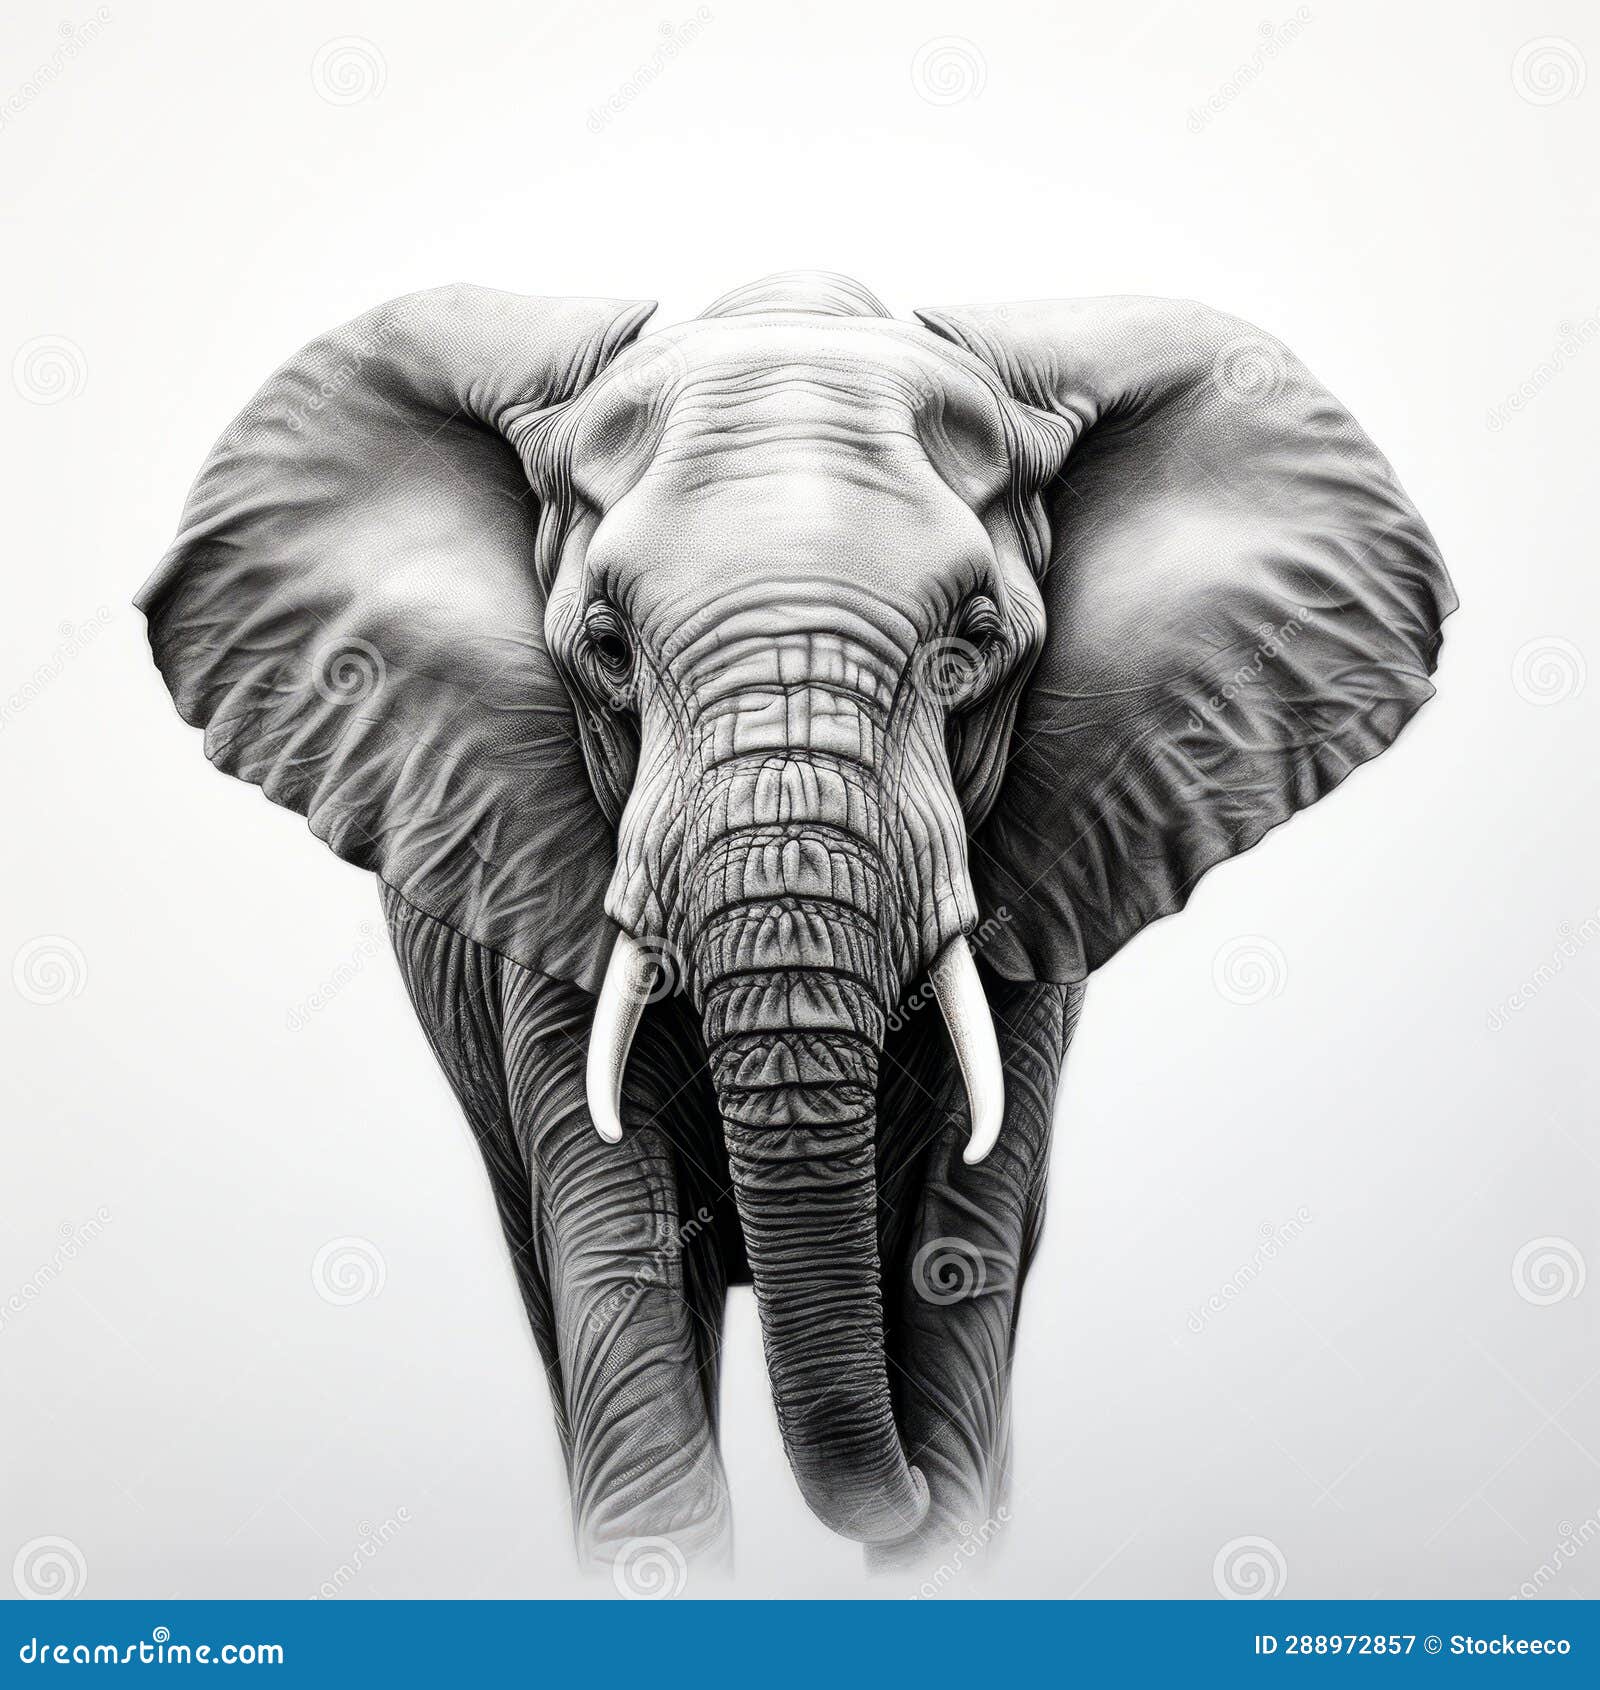 Hyper-realistic Elephant Portrait Tattoo Drawing in Black and White ...